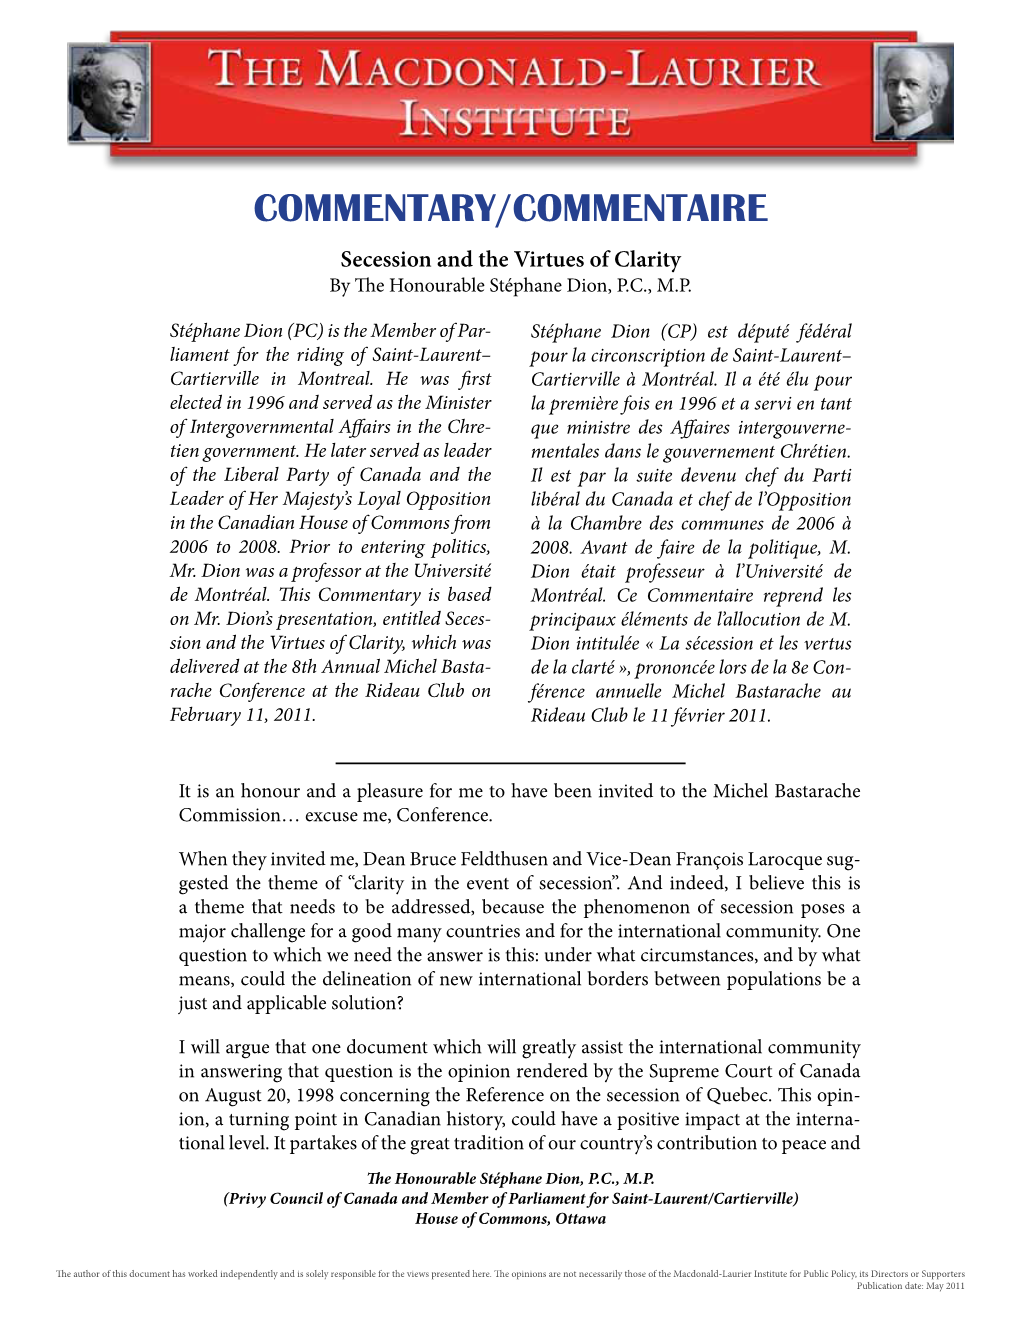 COMMENTARY/COMMENTAIRE Secession and the Virtues of Clarity by the Honourable Stéphane Dion, P.C., M.P